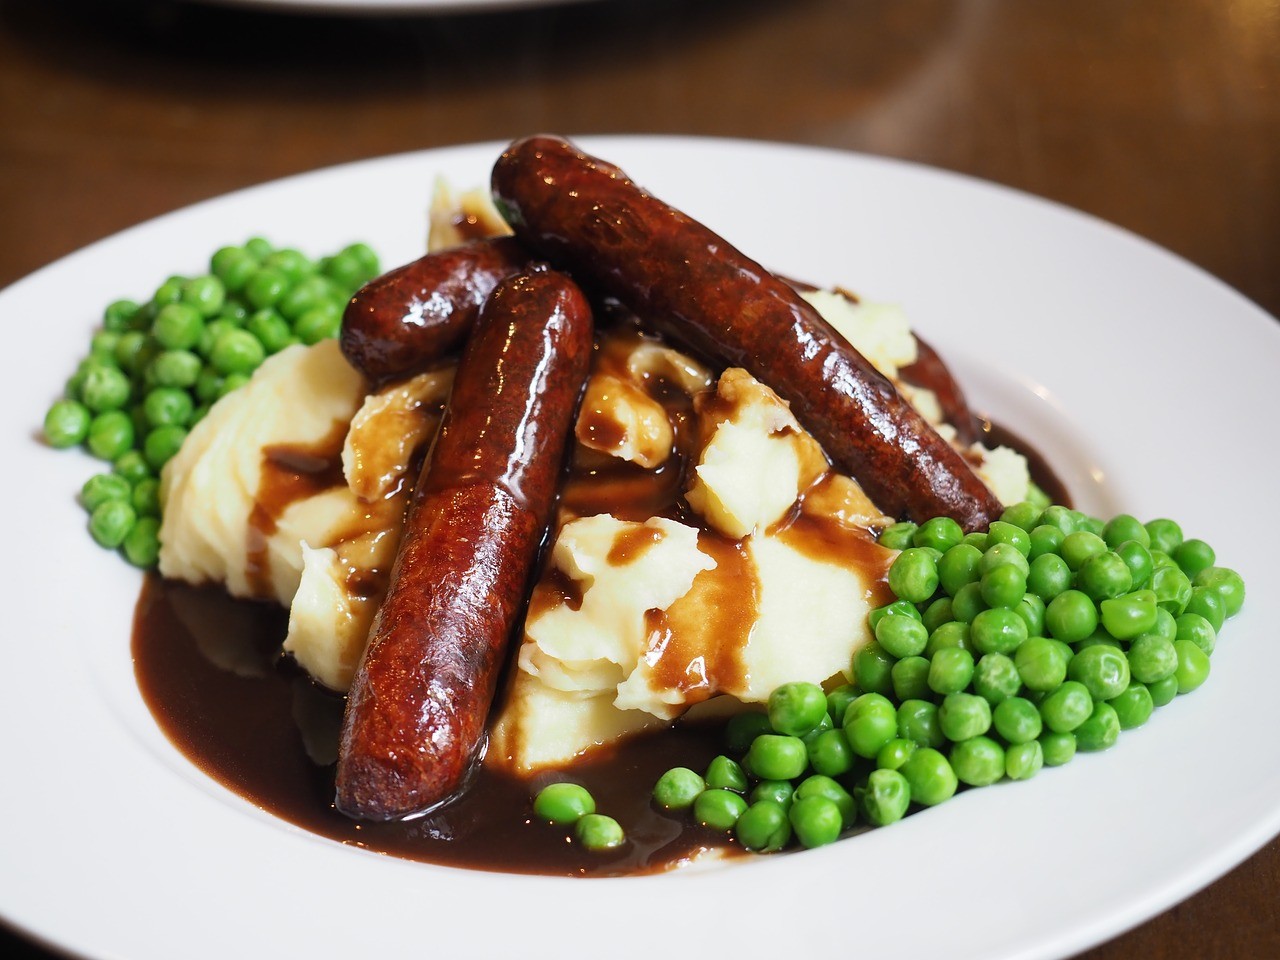 London famous food sausage and mash with peas and gravy